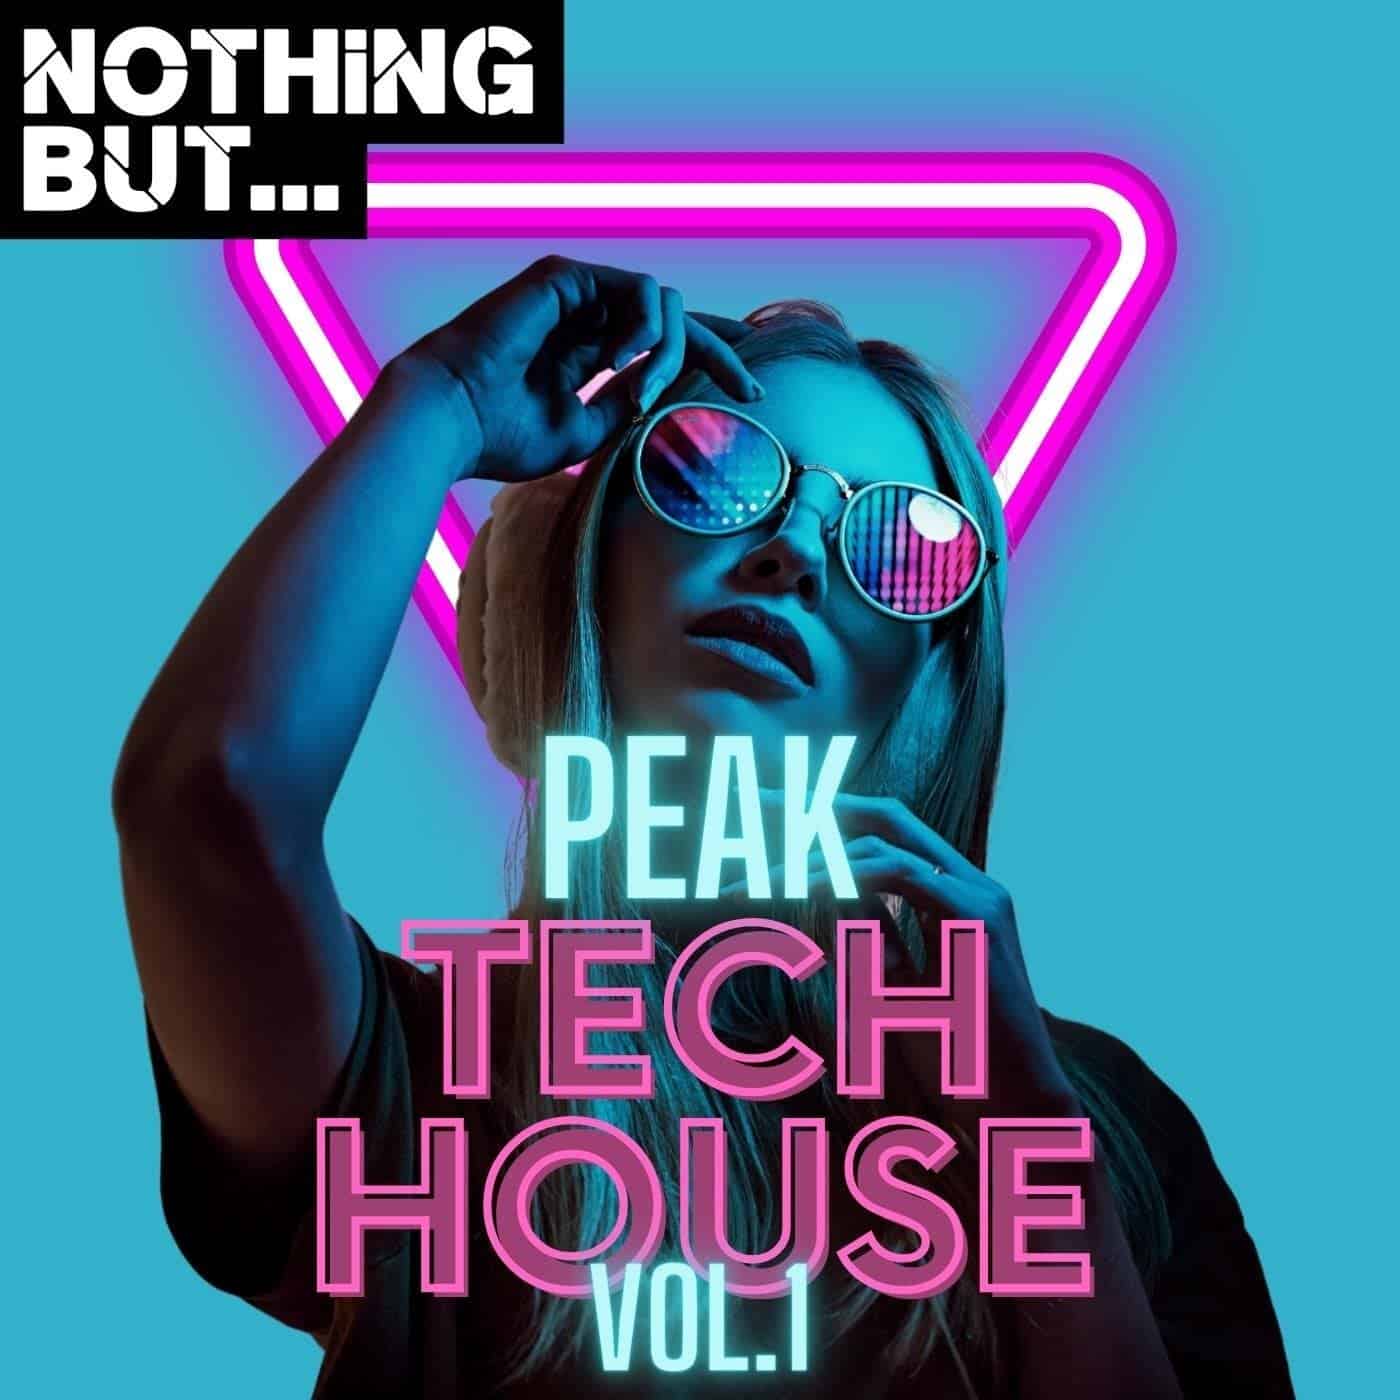 Download VA - Nothing But... Peak Tech House, Vol. 01 on Electrobuzz